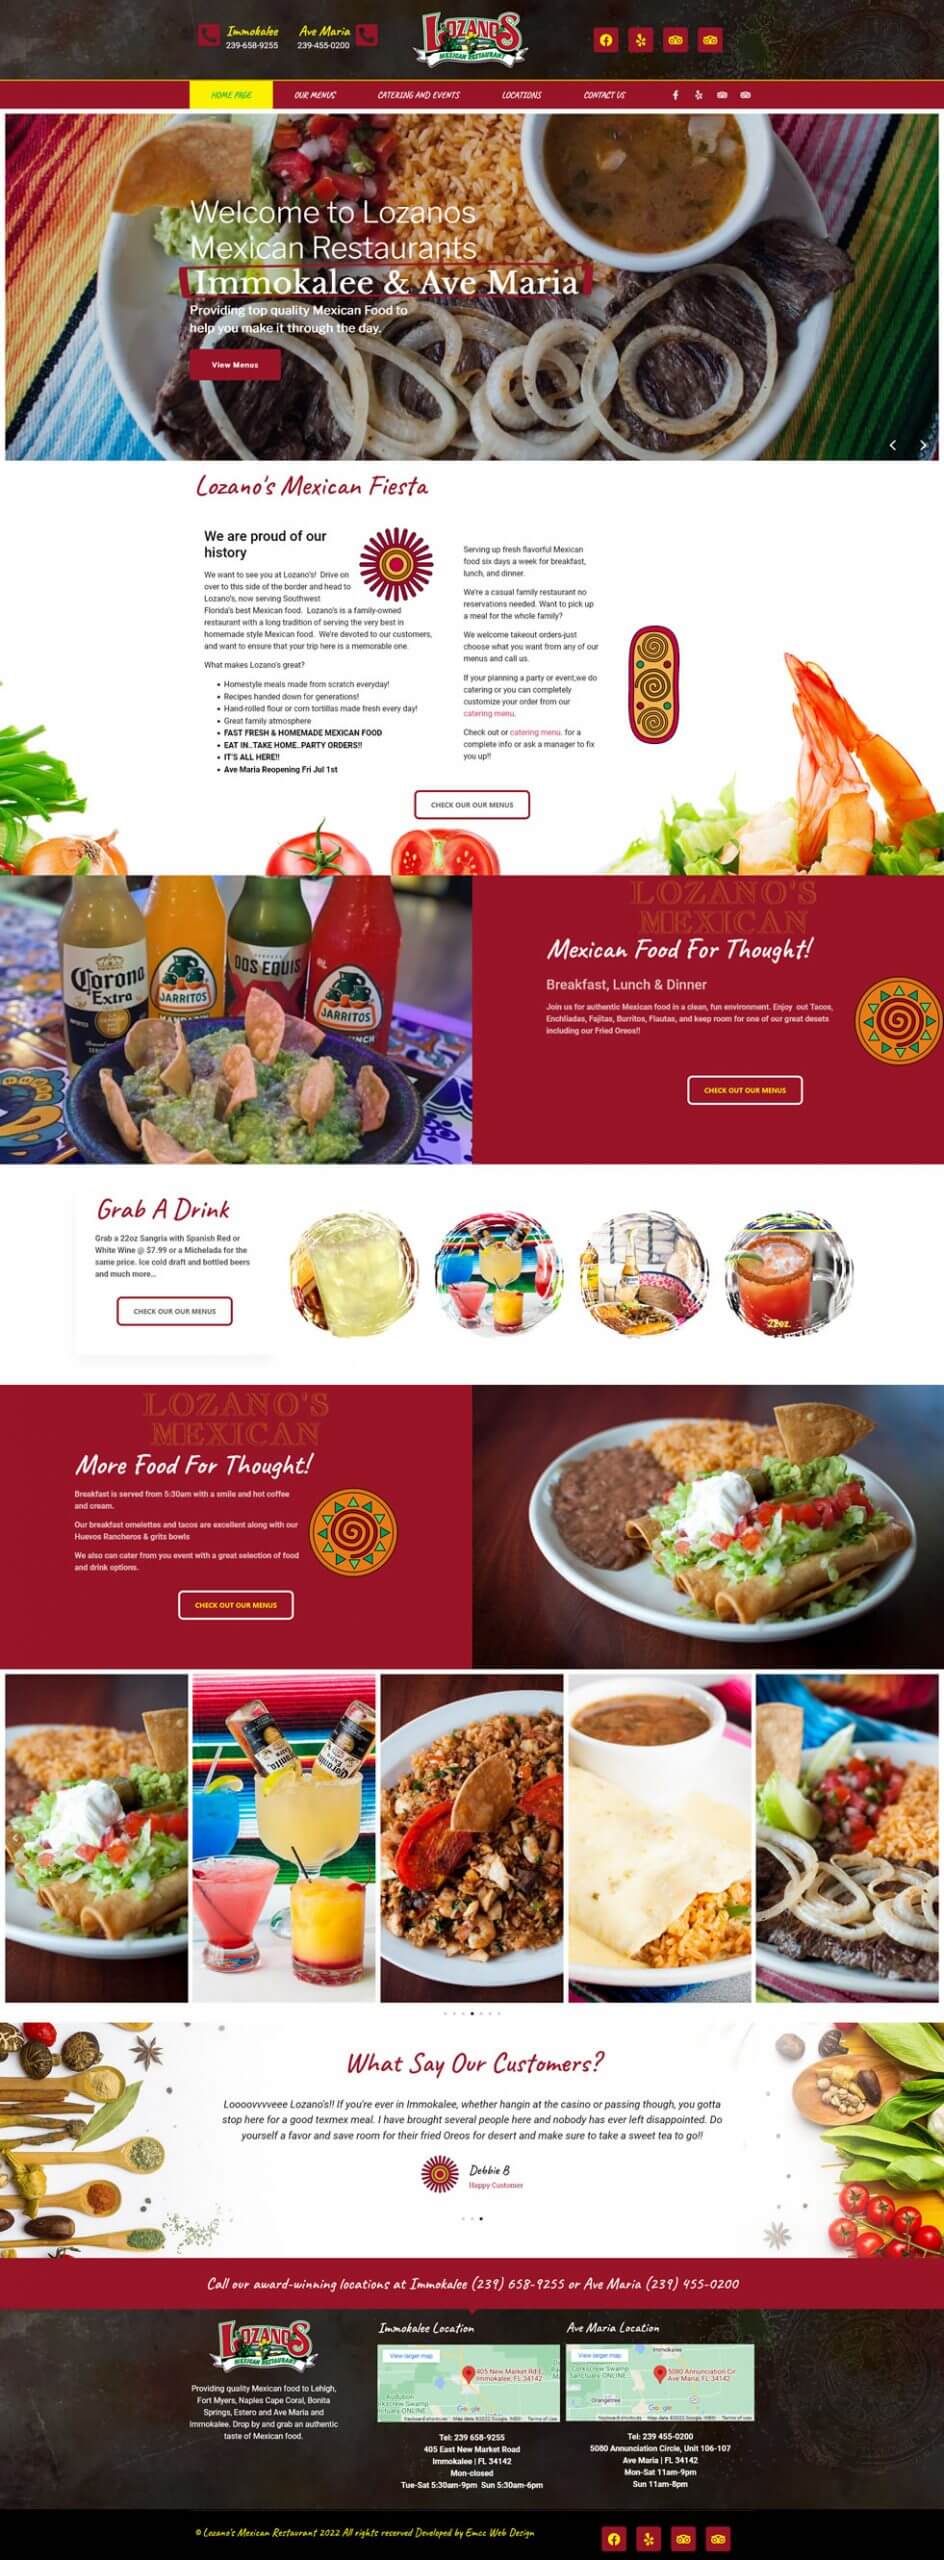 Lozanos Mexican Restaurants – Serving Mexican Food In Immokalee and Avi Maria